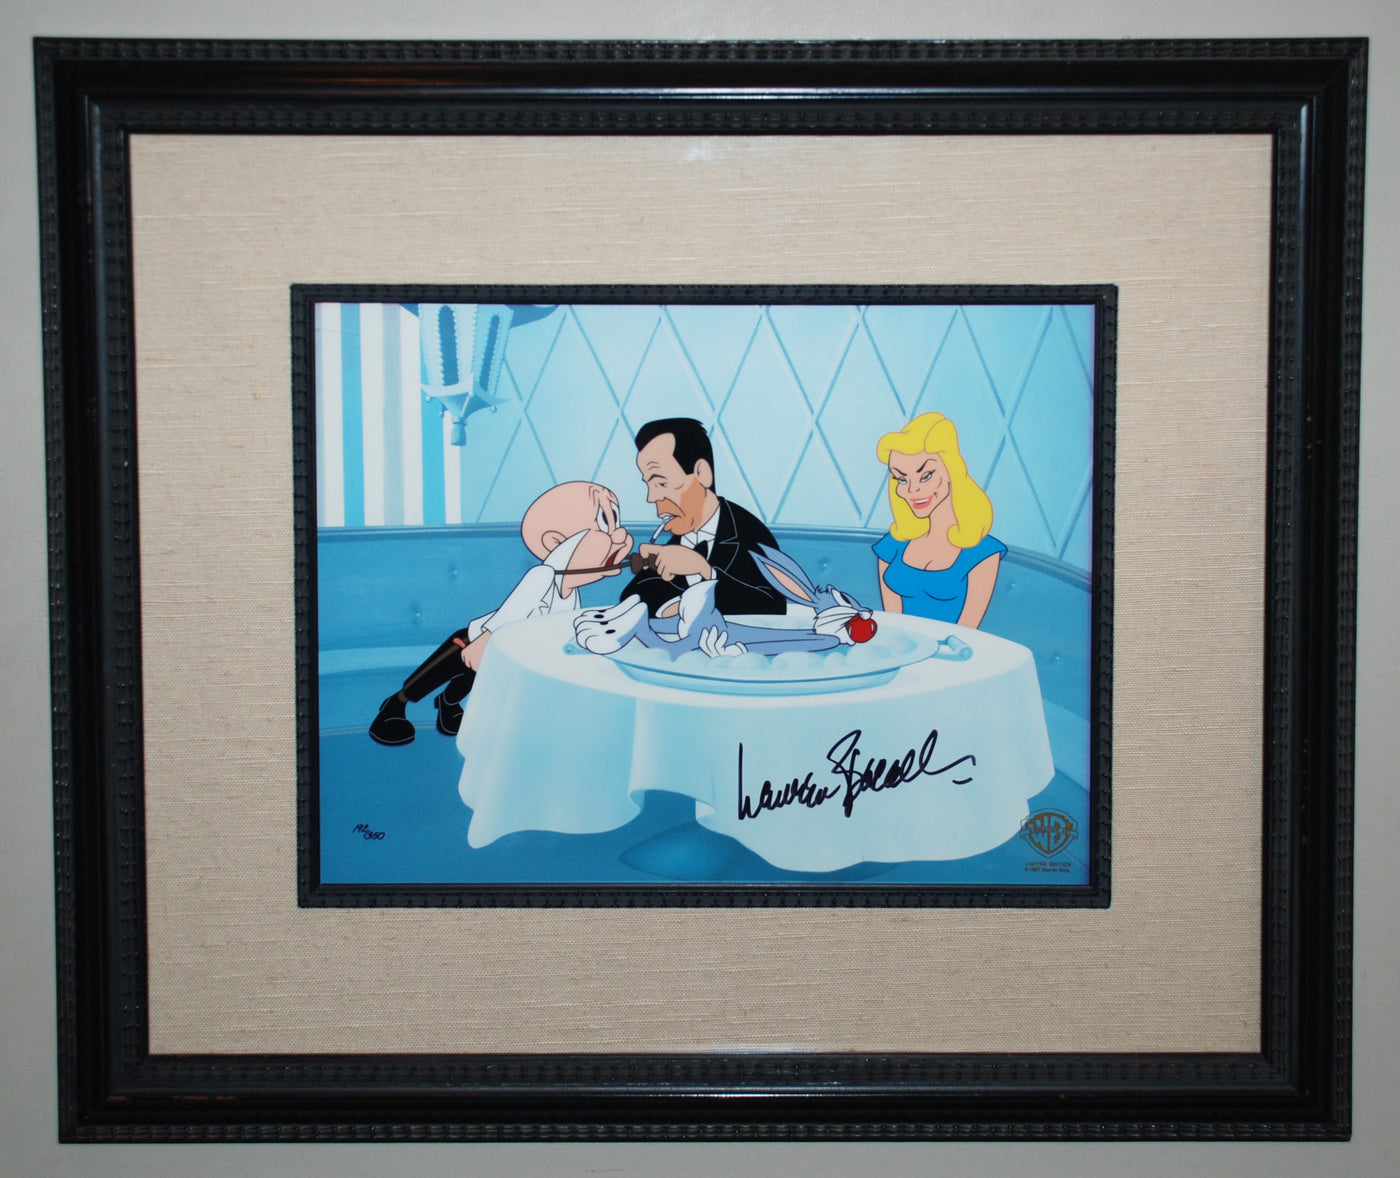 Original Warner Brothers Limited Edition Cel, If It's Rabbit Baby Wants, Signed by Lauren Bacall